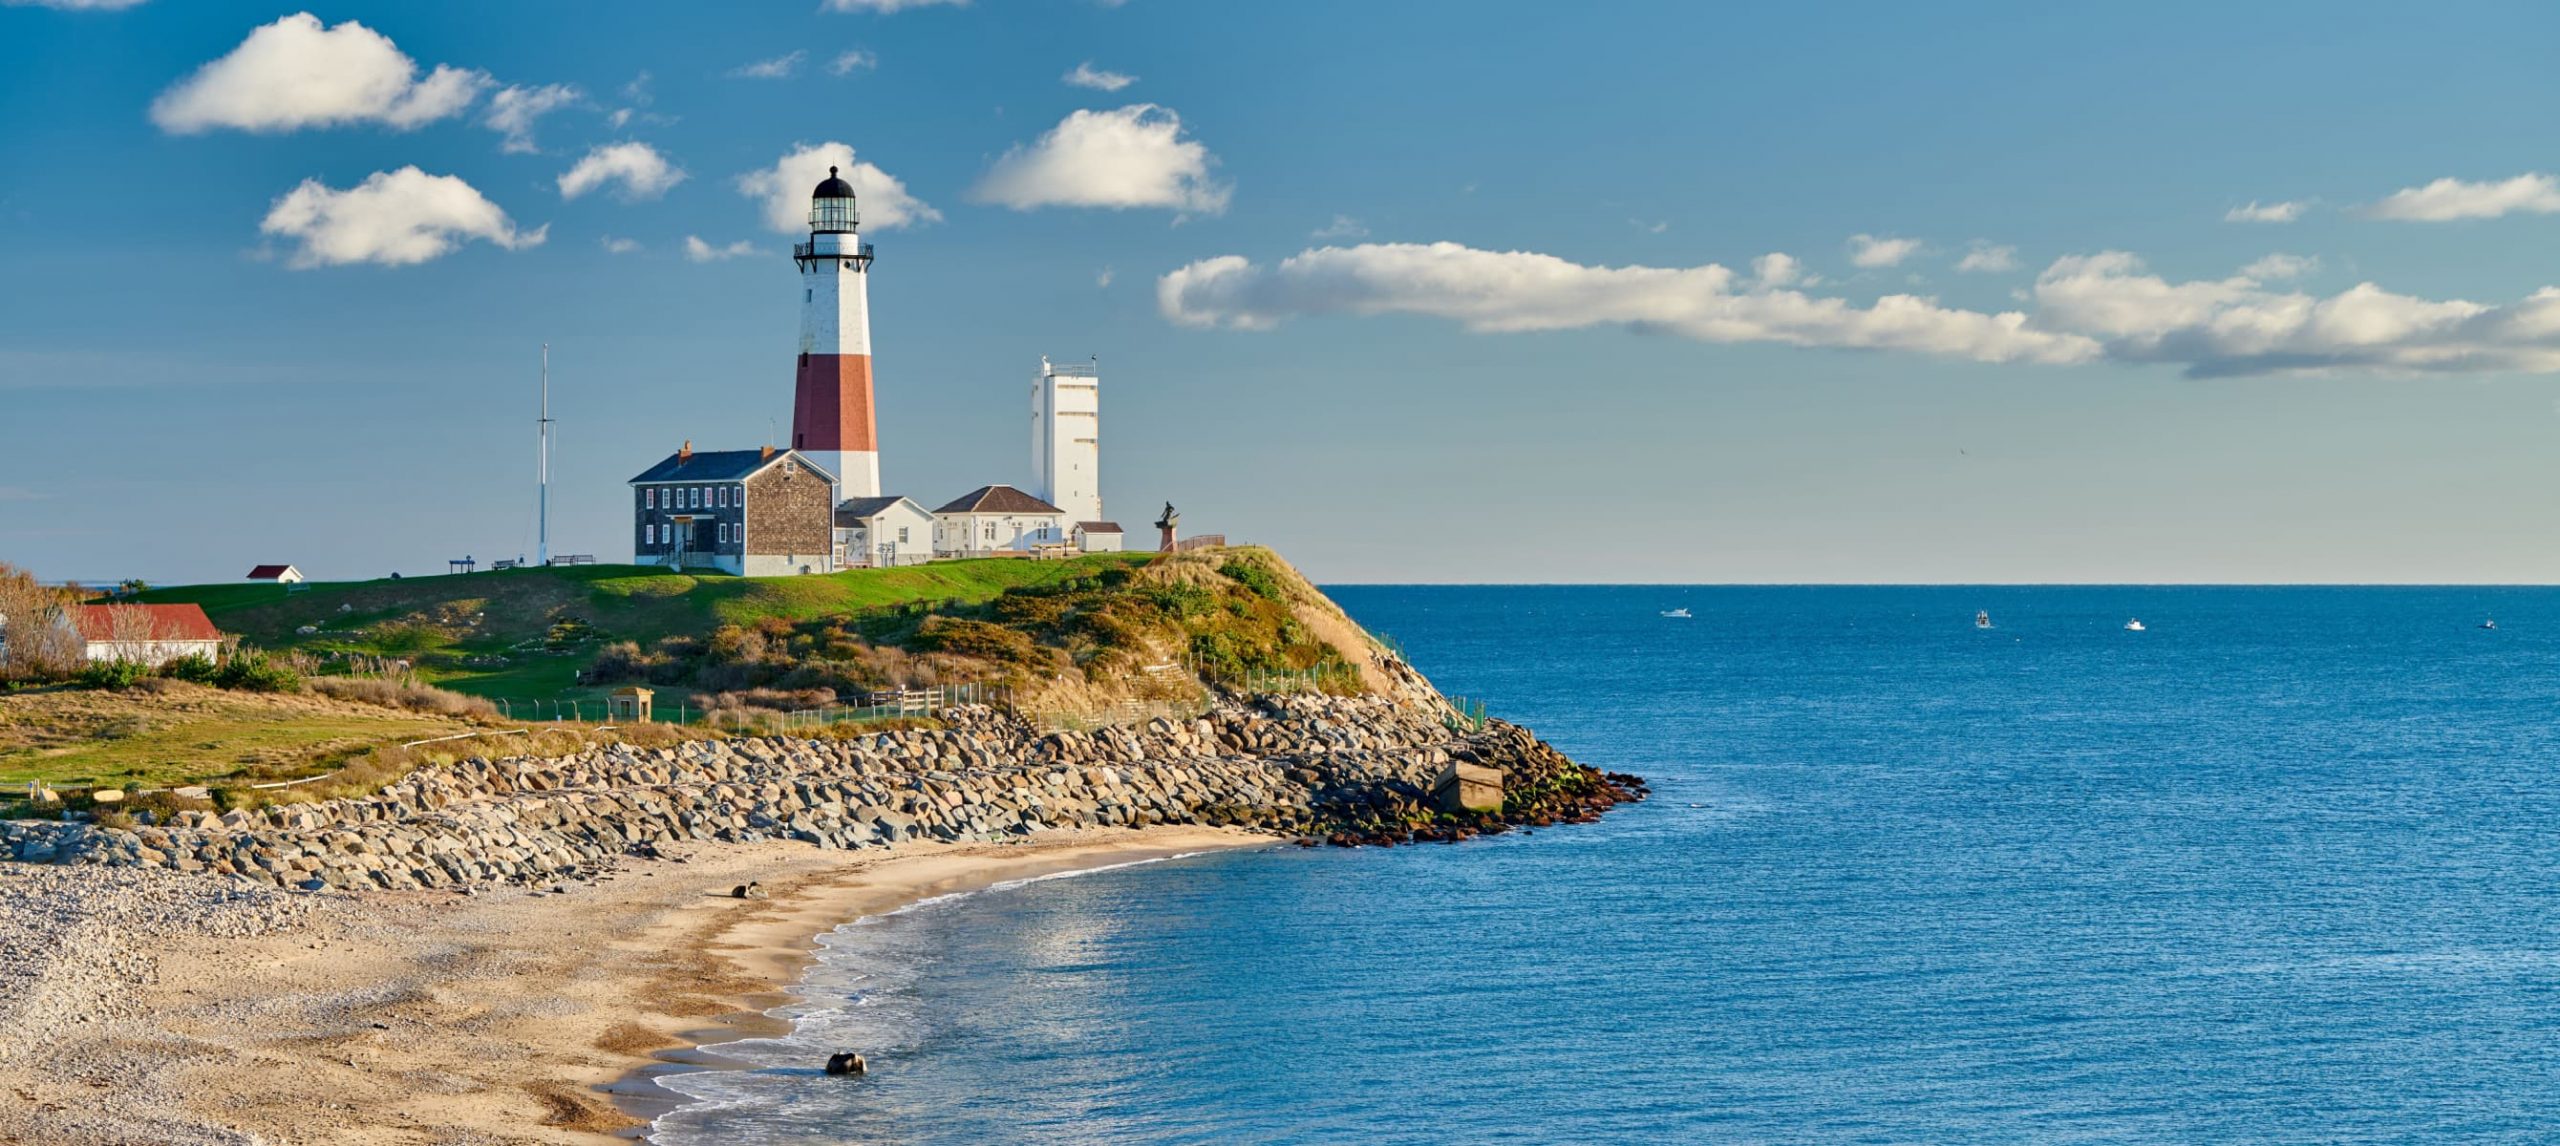 The Top 10 Things to do in Montauk, New York